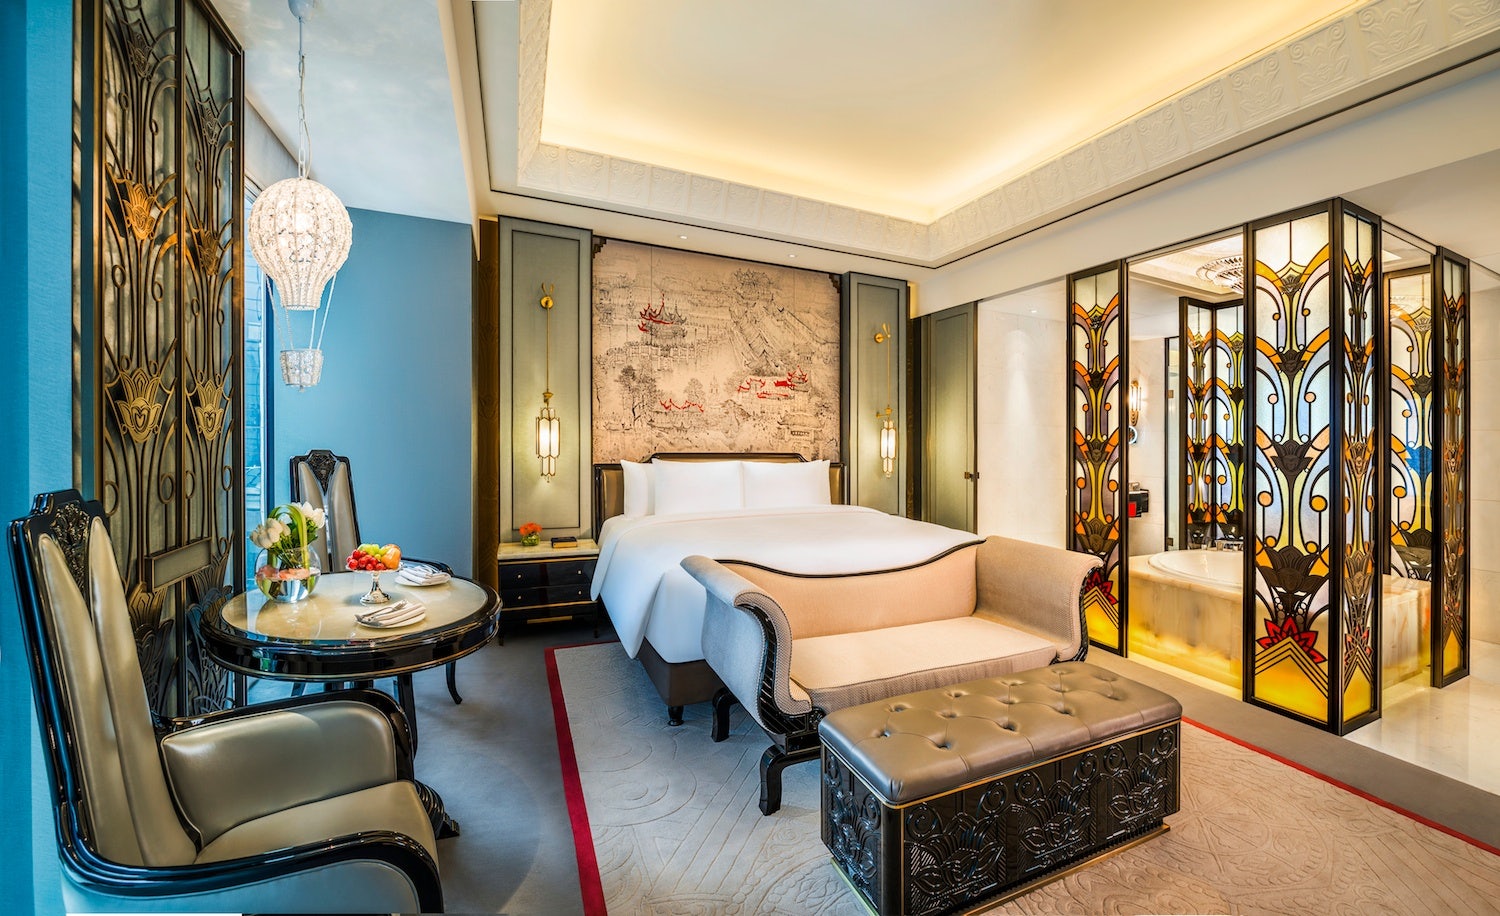 Wanda Reign's Deluxe suite boasts views of the Shanghai Bund. (Courtesy Photo)